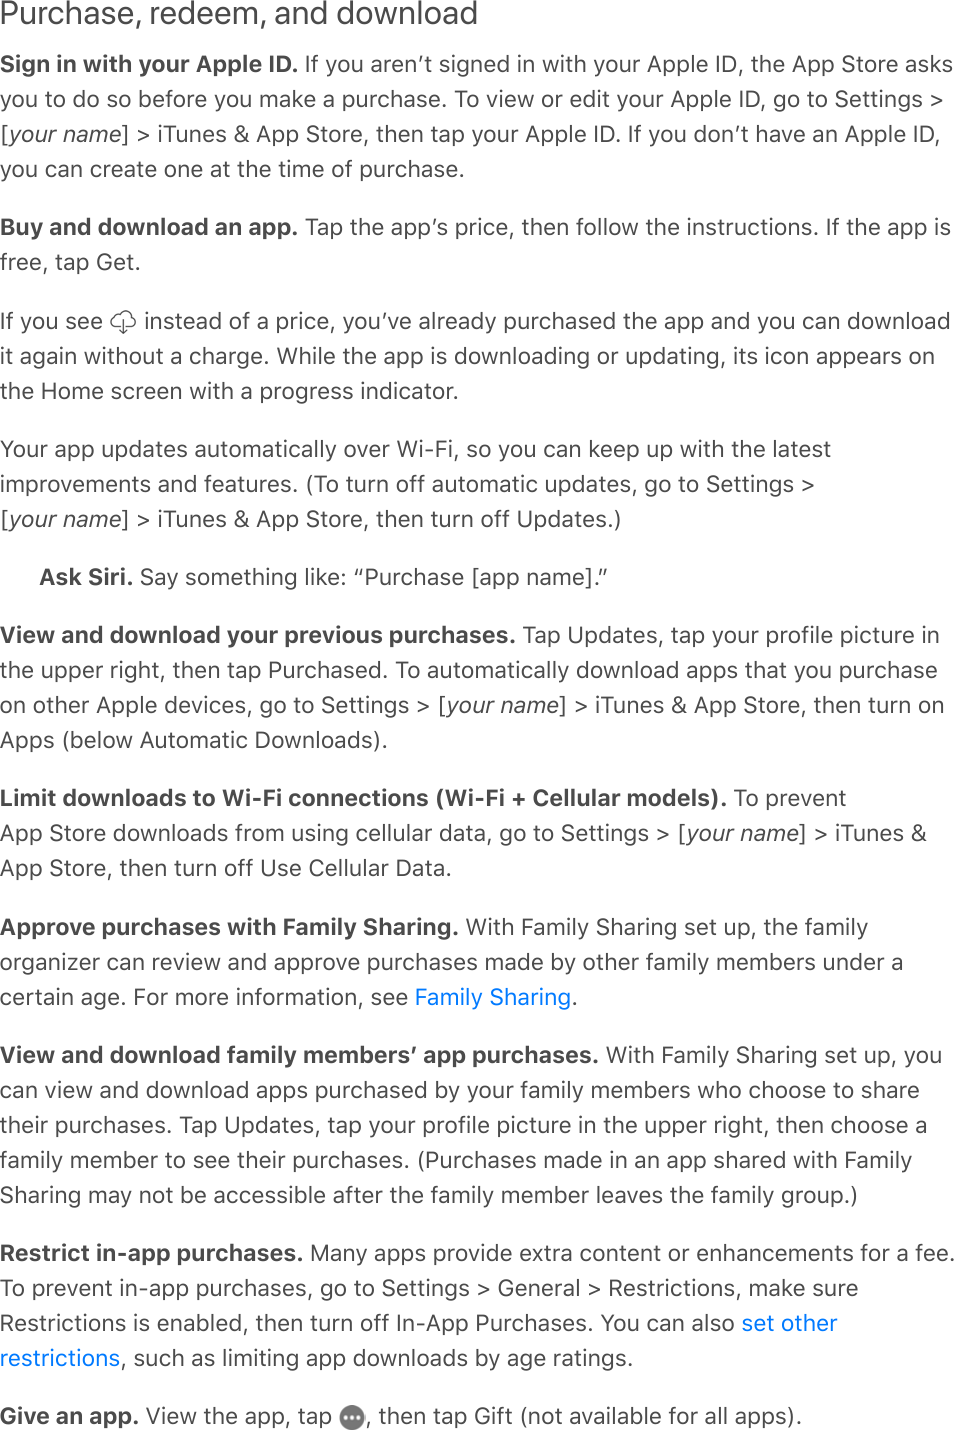 Purchase, redeem, and downloadSign in with your Apple ID. If you arenʼt signed in with your Apple ID, the App Store asksyou to do so before you make a purchase. To view or edit your Apple ID, go to Settings &gt;[your name] &gt; iTunes &amp; App Store, then tap your Apple ID. If you donʼt have an Apple ID,you can create one at the time of purchase.Buy and download an app. Tap the appʼs price, then follow the instructions. If the app isfree, tap Get.If you see   instead of a price, youʼve already purchased the app and you can downloadit again without a charge. While the app is downloading or updating, its icon appears onthe Home screen with a progress indicator.Your app updates automatically over Wi-Fi, so you can keep up with the latestimprovements and features. (To turn off automatic updates, go to Settings &gt;[your name] &gt; iTunes &amp; App Store, then turn off Updates.)Ask Siri. Say something like: “Purchase [app name].”View and download your previous purchases. Tap Updates, tap your profile picture inthe upper right, then tap Purchased. To automatically download apps that you purchaseon other Apple devices, go to Settings &gt; [your name] &gt; iTunes &amp; App Store, then turn onApps (below Automatic Downloads).Limit downloads to Wi-Fi connections (Wi-Fi + Cellular models). To preventApp Store downloads from using cellular data, go to Settings &gt; [your name] &gt; iTunes &amp;App Store, then turn off Use Cellular Data.Approve purchases with Family Sharing. With Family Sharing set up, the familyorganizer can review and approve purchases made by other family members under acertain age. For more information, see  .View and download family membersʼ app purchases. With Family Sharing set up, youcan view and download apps purchased by your family members who choose to sharetheir purchases. Tap Updates, tap your profile picture in the upper right, then choose afamily member to see their purchases. (Purchases made in an app shared with FamilySharing may not be accessible after the family member leaves the family group.)Restrict in-app purchases. Many apps provide extra content or enhancements for a fee.To prevent in-app purchases, go to Settings &gt; General &gt; Restrictions, make sureRestrictions is enabled, then turn off In-App Purchases. You can also , such as limiting app downloads by age ratings.Give an app. View the app, tap  , then tap Gift (not available for all apps).Family Sharingset otherrestrictions